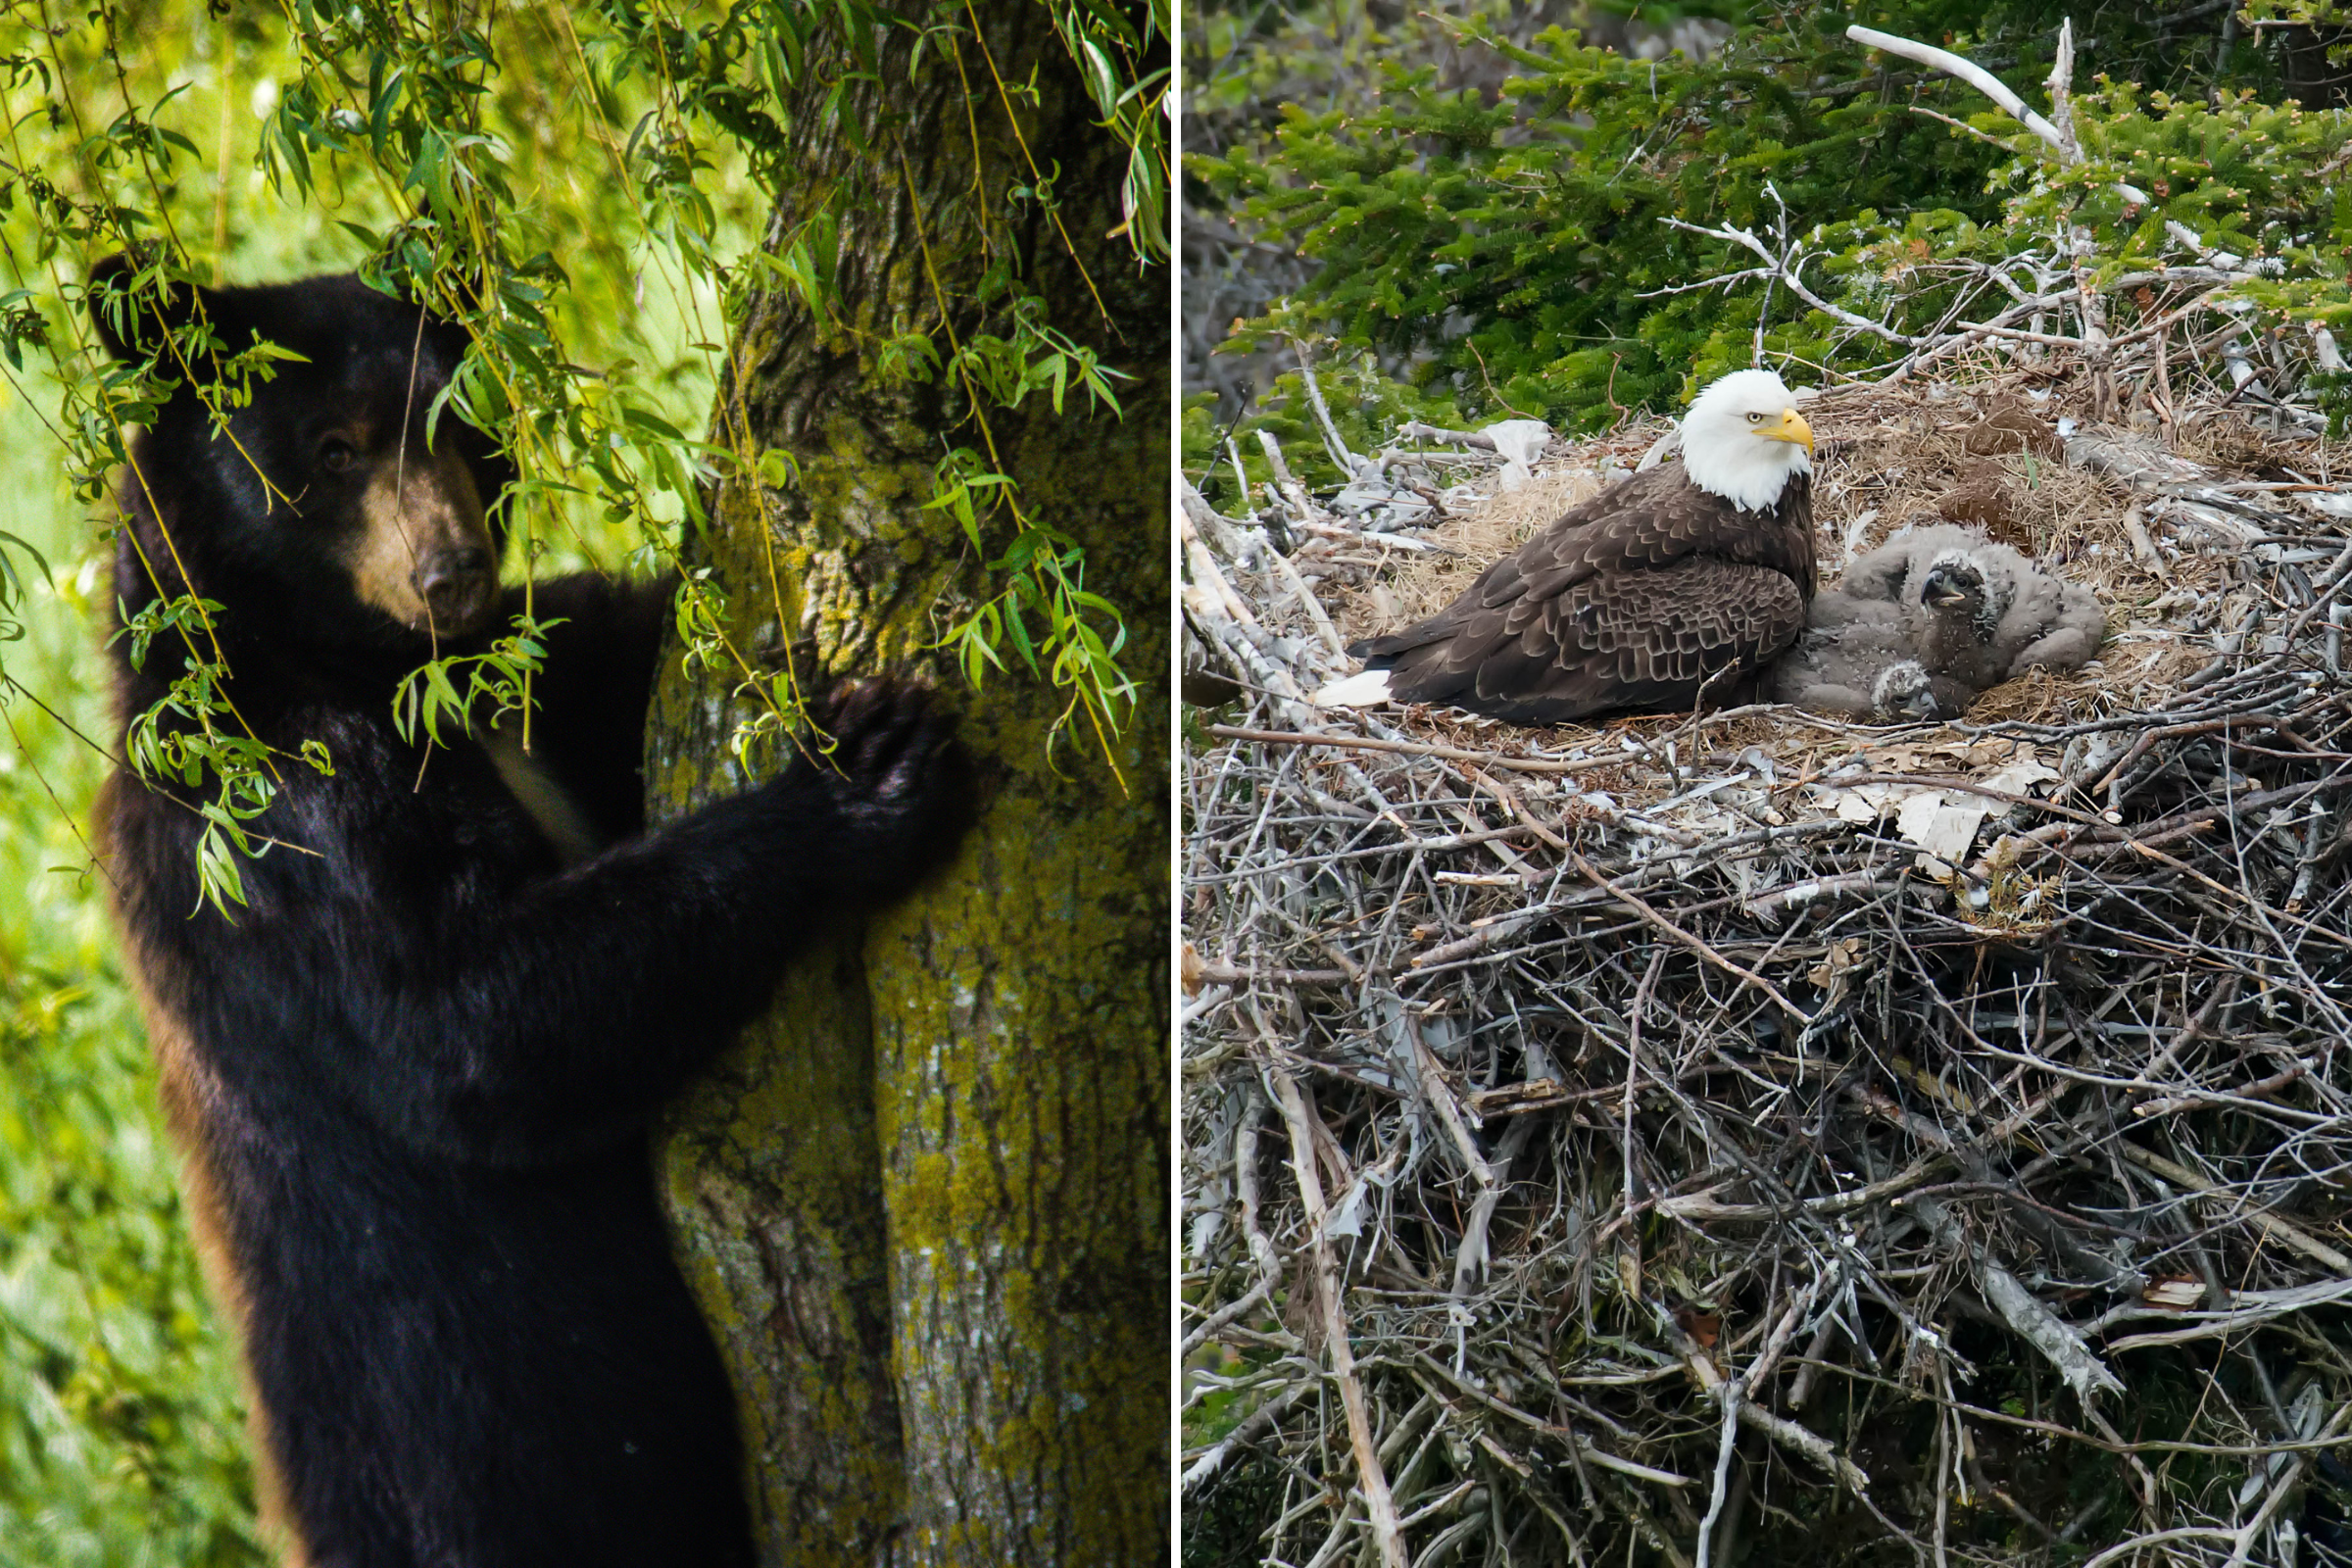 Incredible Footage of Bear Scaling Tree To Catch Eagle Viewed 2m Times